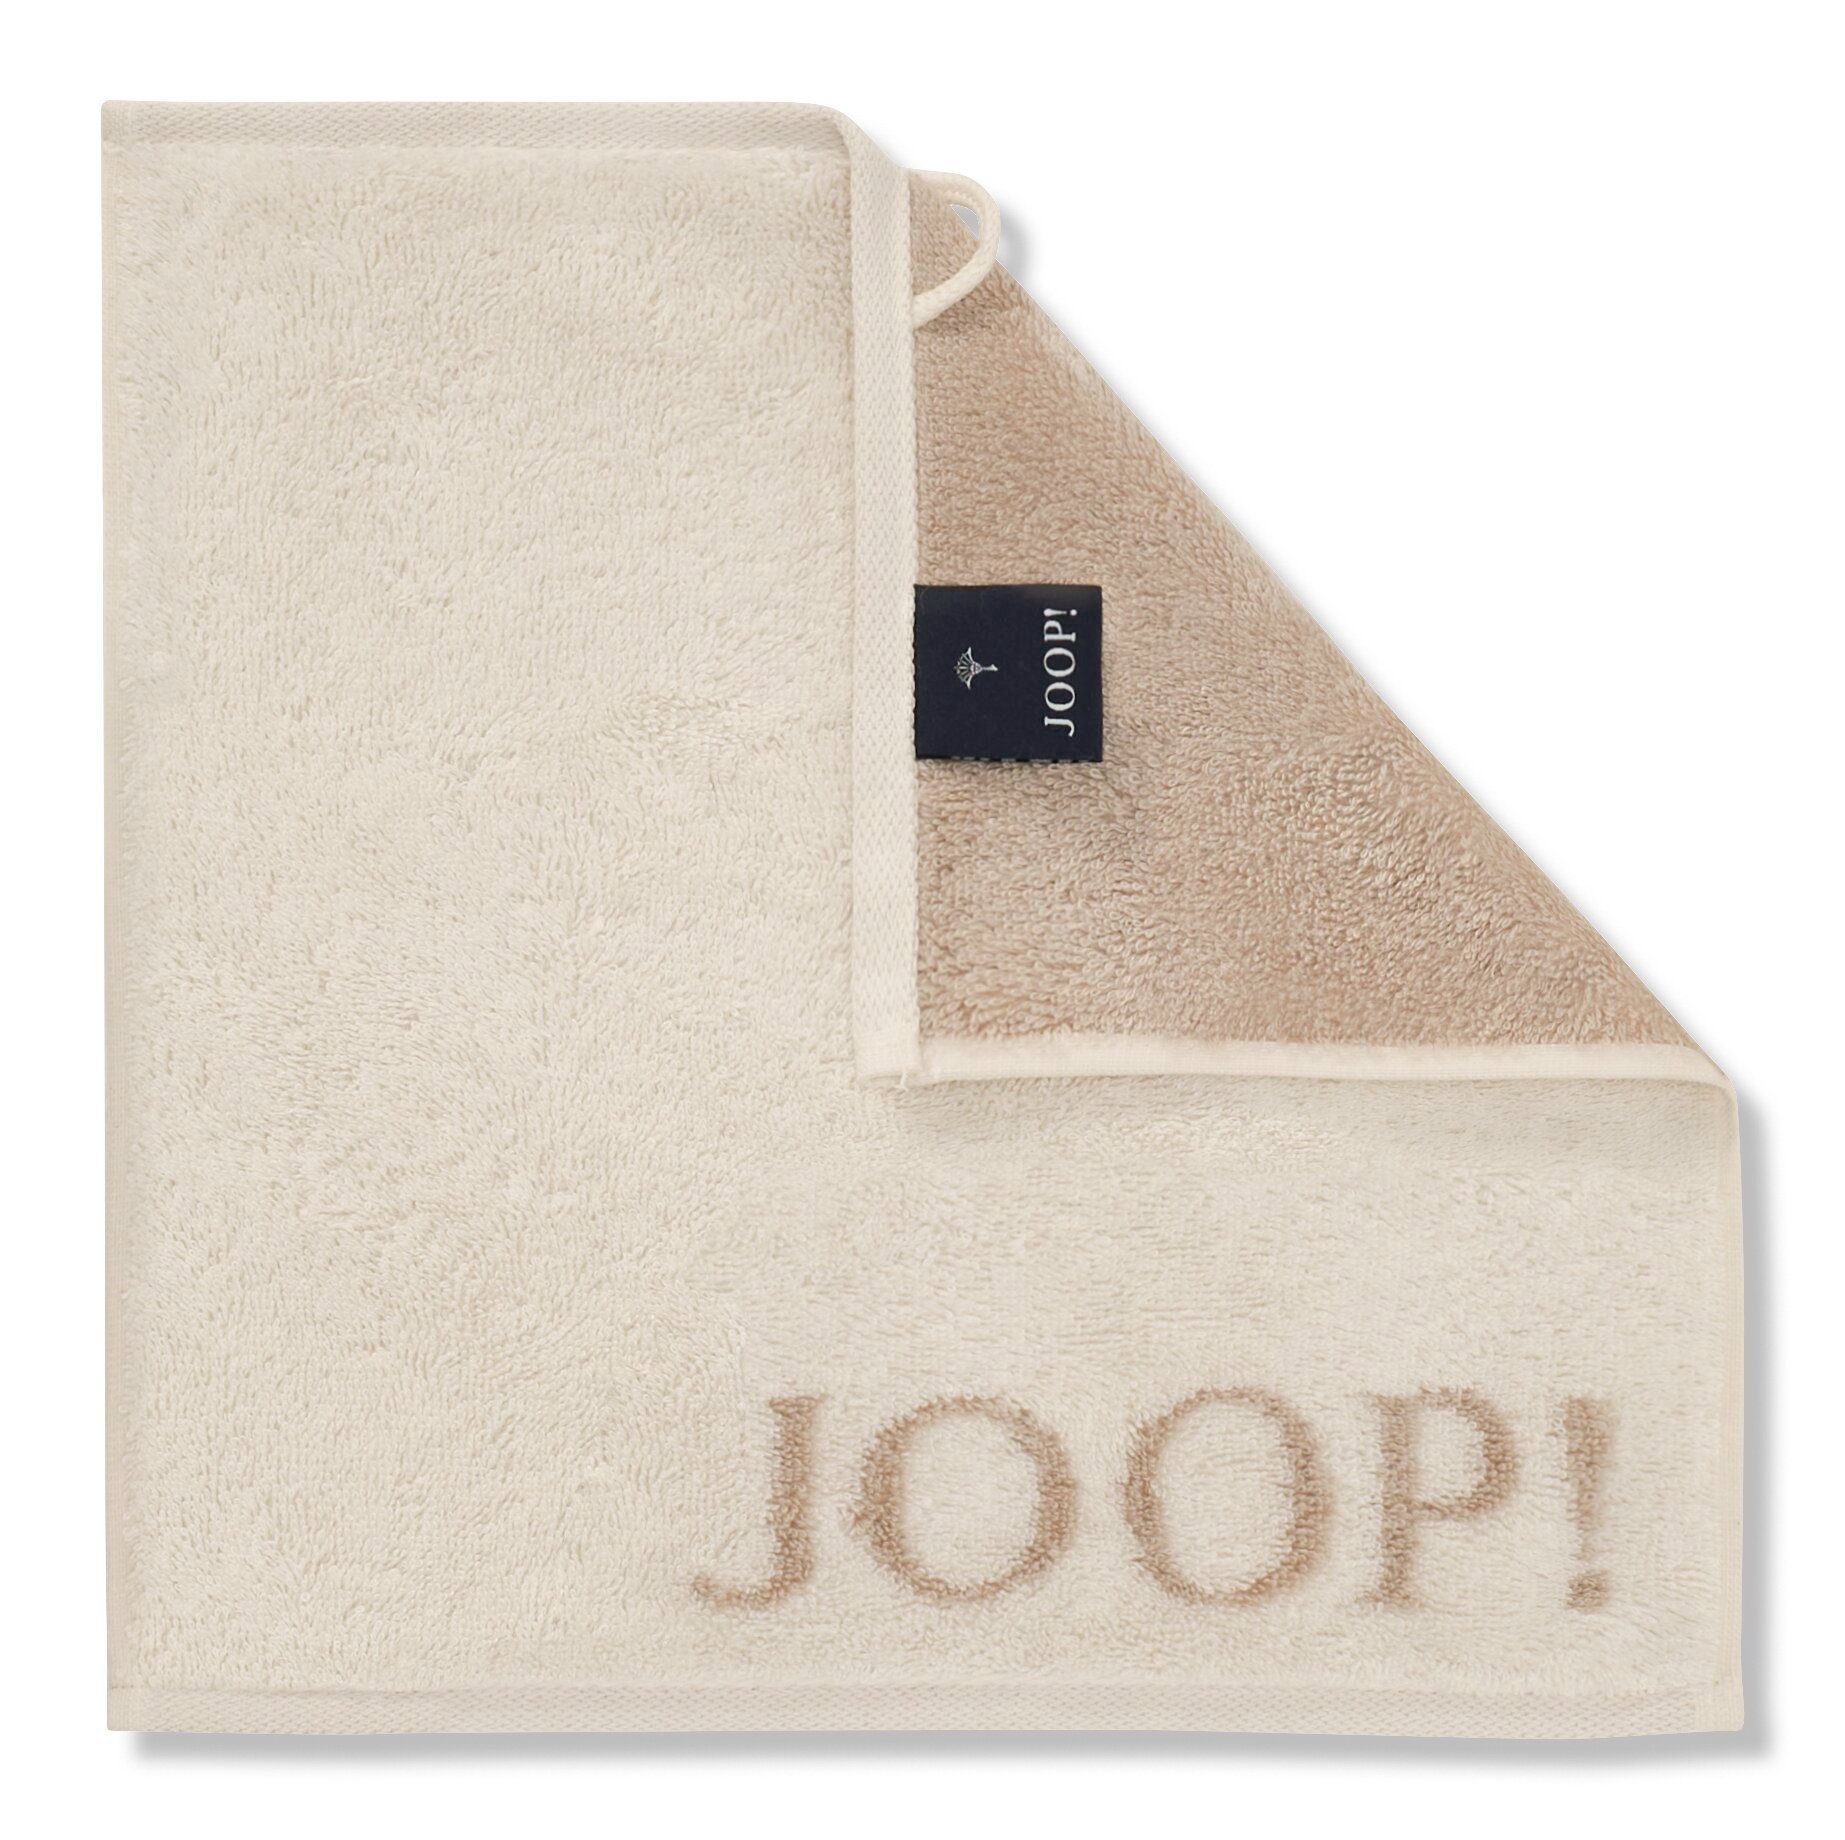 Joop! Seiftuch JOOP! LIVING - CLASSIC DOUBLEFACE Seifentuch-Set (3-tlg) Creme